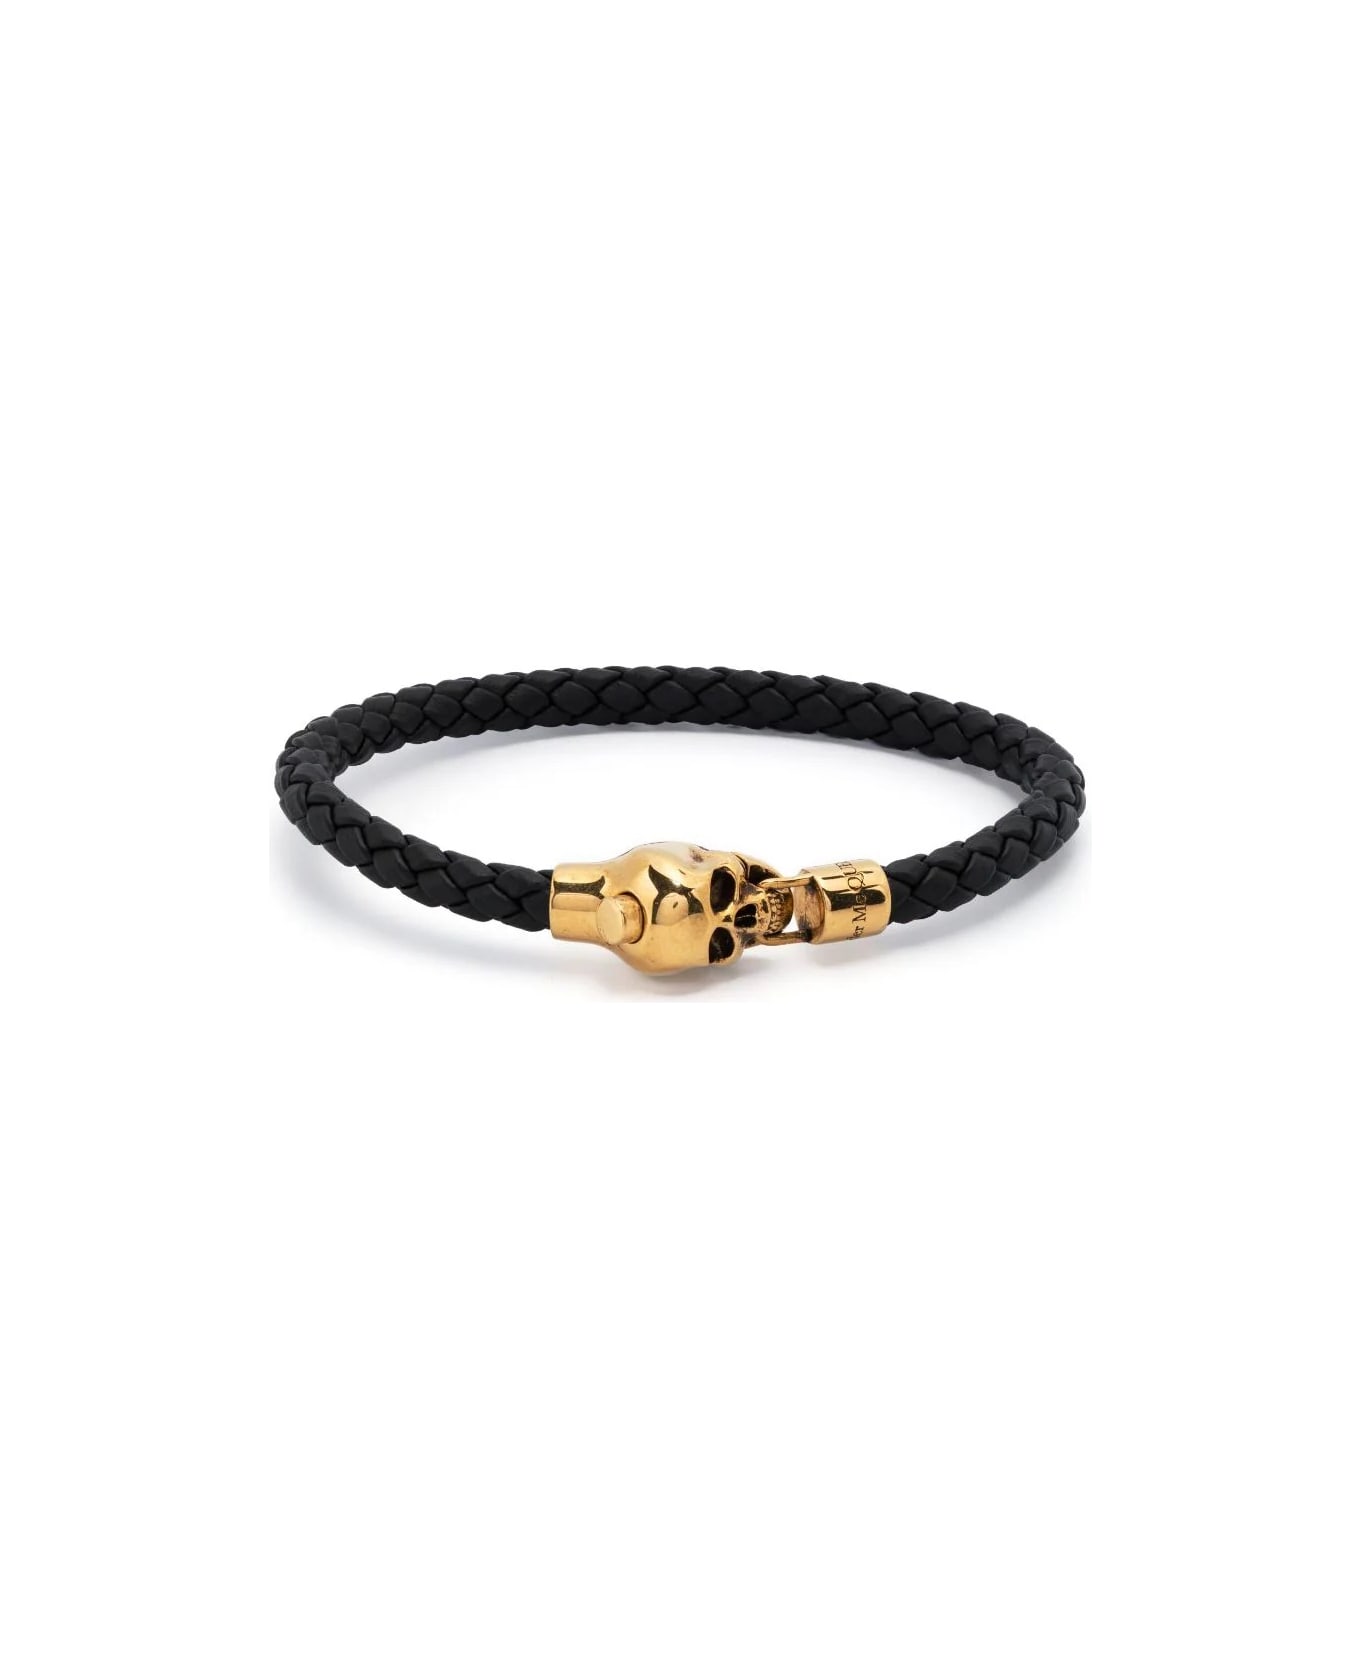 Alexander McQueen Braided Leather Bracelet With Skull Detail - Black ブレスレット